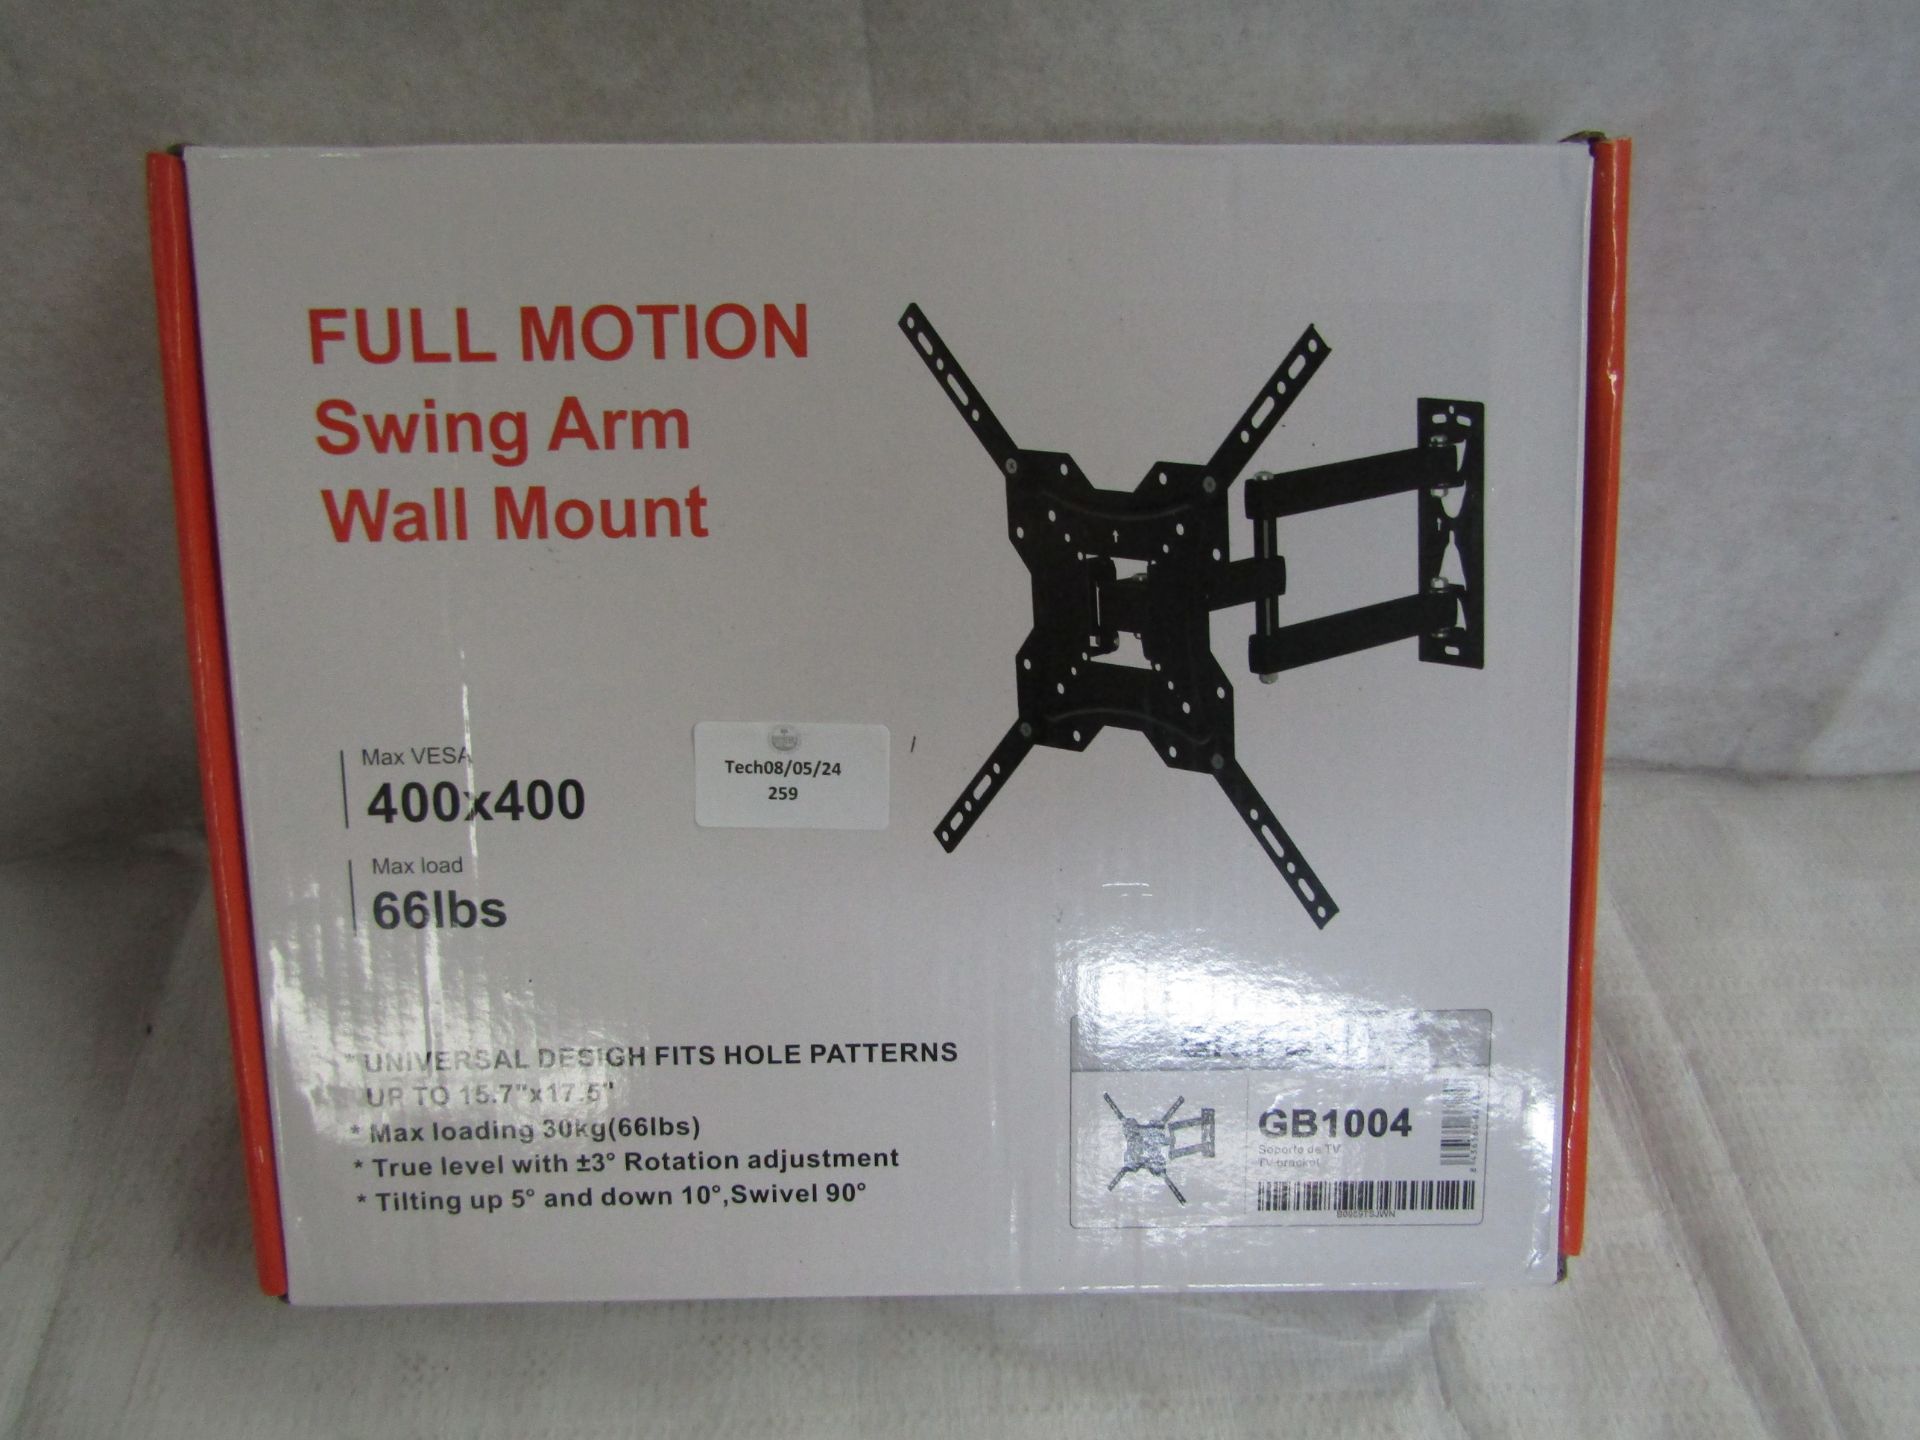 Full Motion Swing Arm Wall Mount, Unchecked & Boxed.